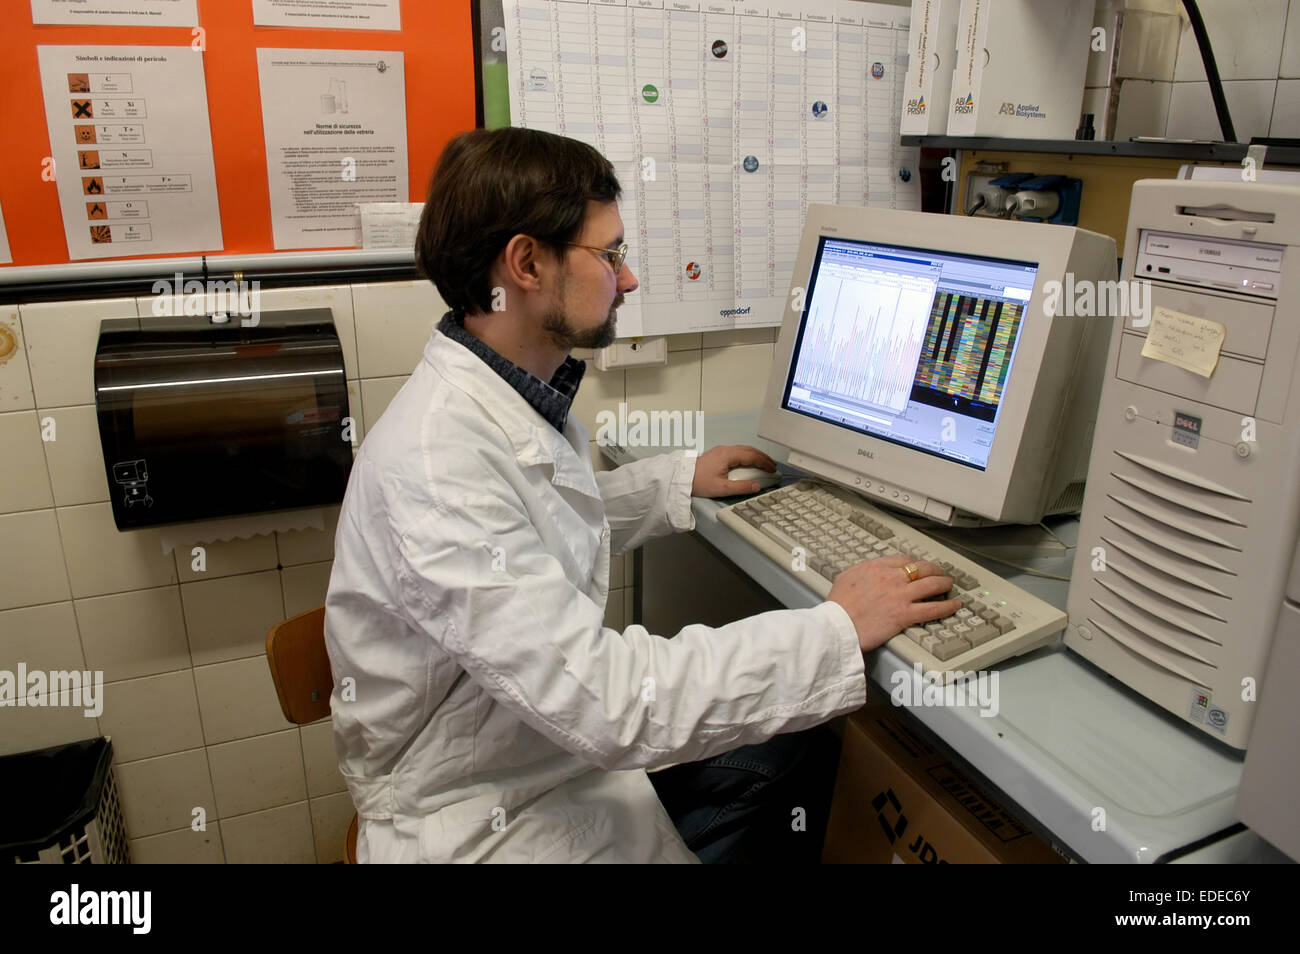 University of Milan (Italy), department of Biology and Genetics for Medical Sciences, mapping of the DNA Stock Photo